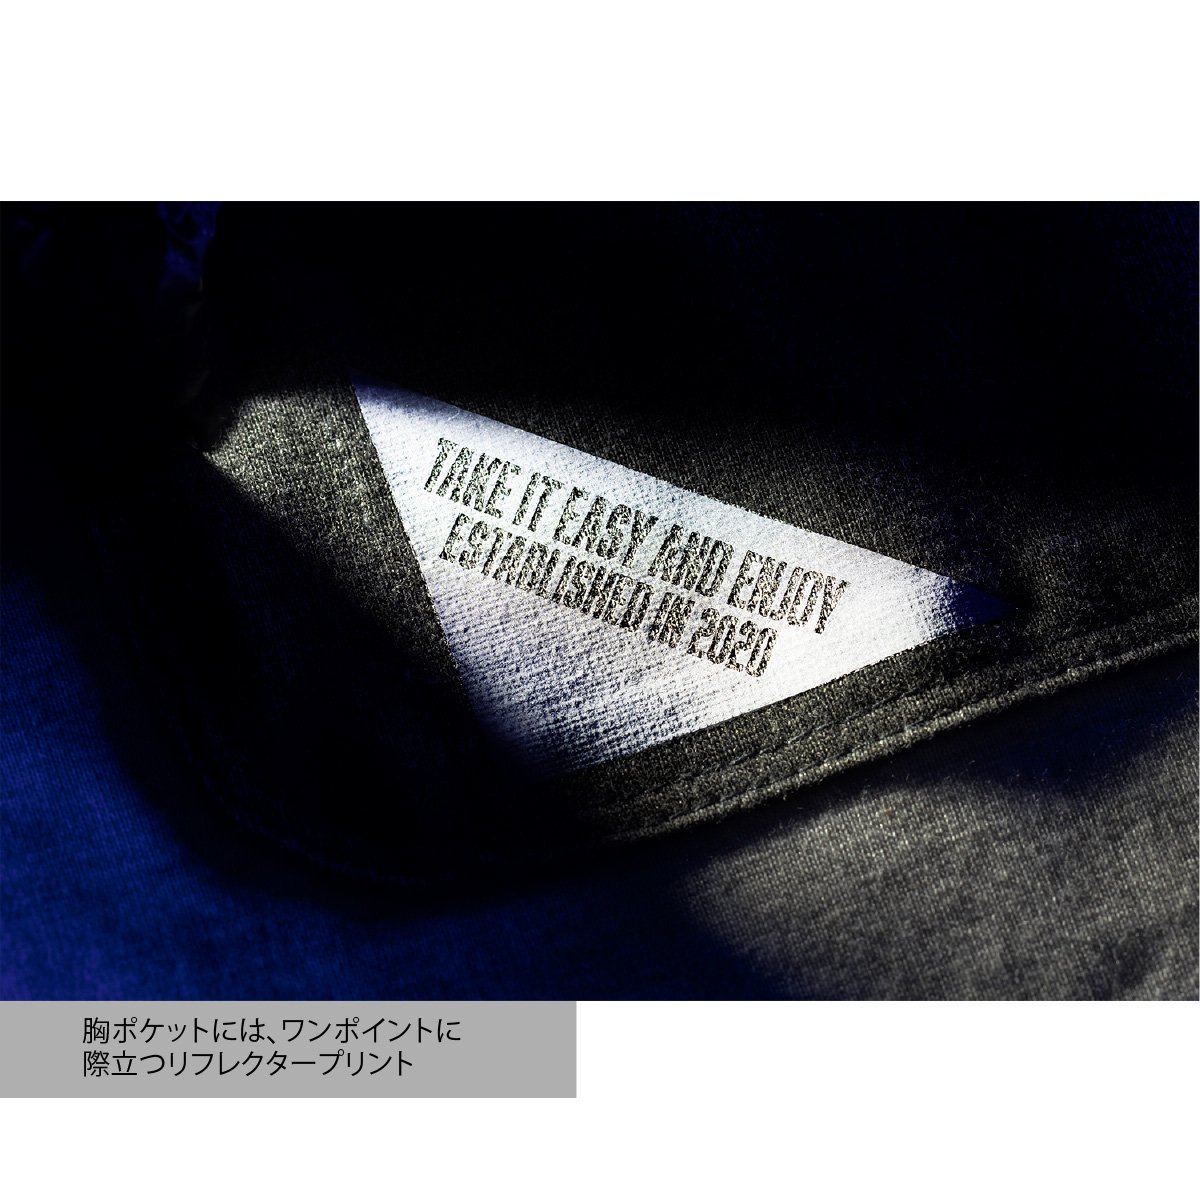 <img class='new_mark_img1' src='https://img.shop-pro.jp/img/new/icons15.gif' style='border:none;display:inline;margin:0px;padding:0px;width:auto;' />3A Back Logo T-Shirt